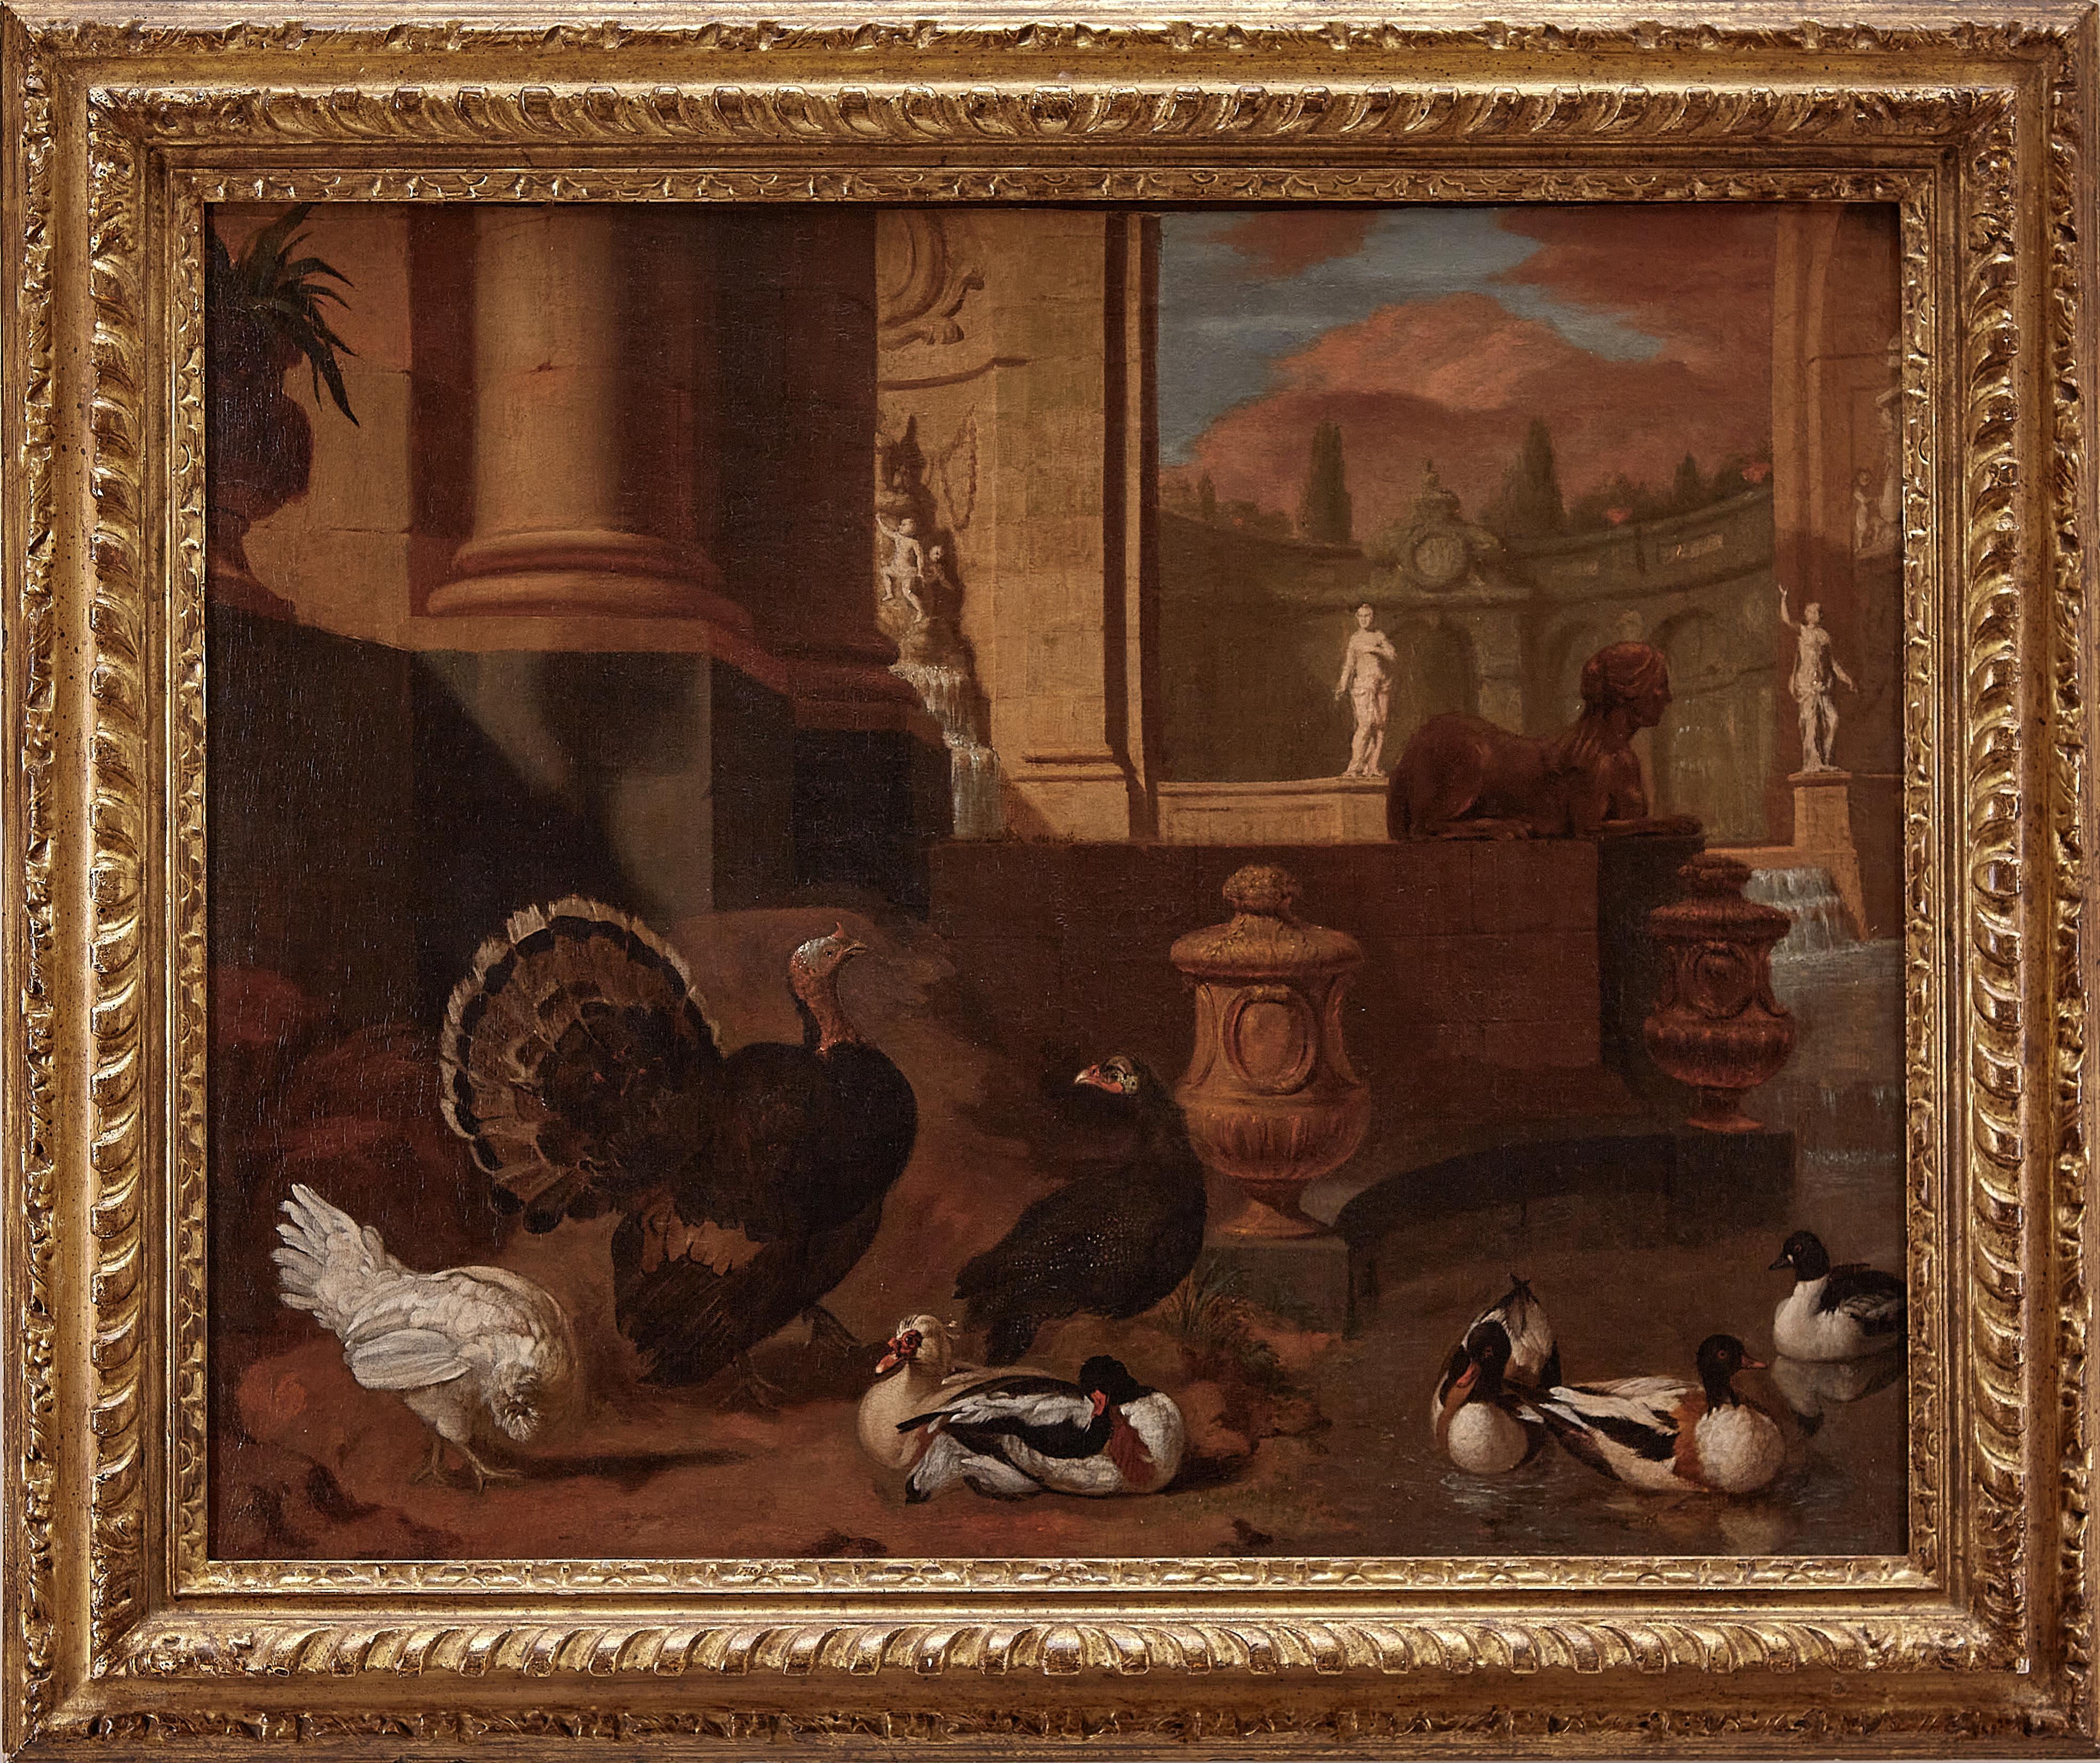 Dutch 18th century painting of birds and ornamental fowl with classical ruins